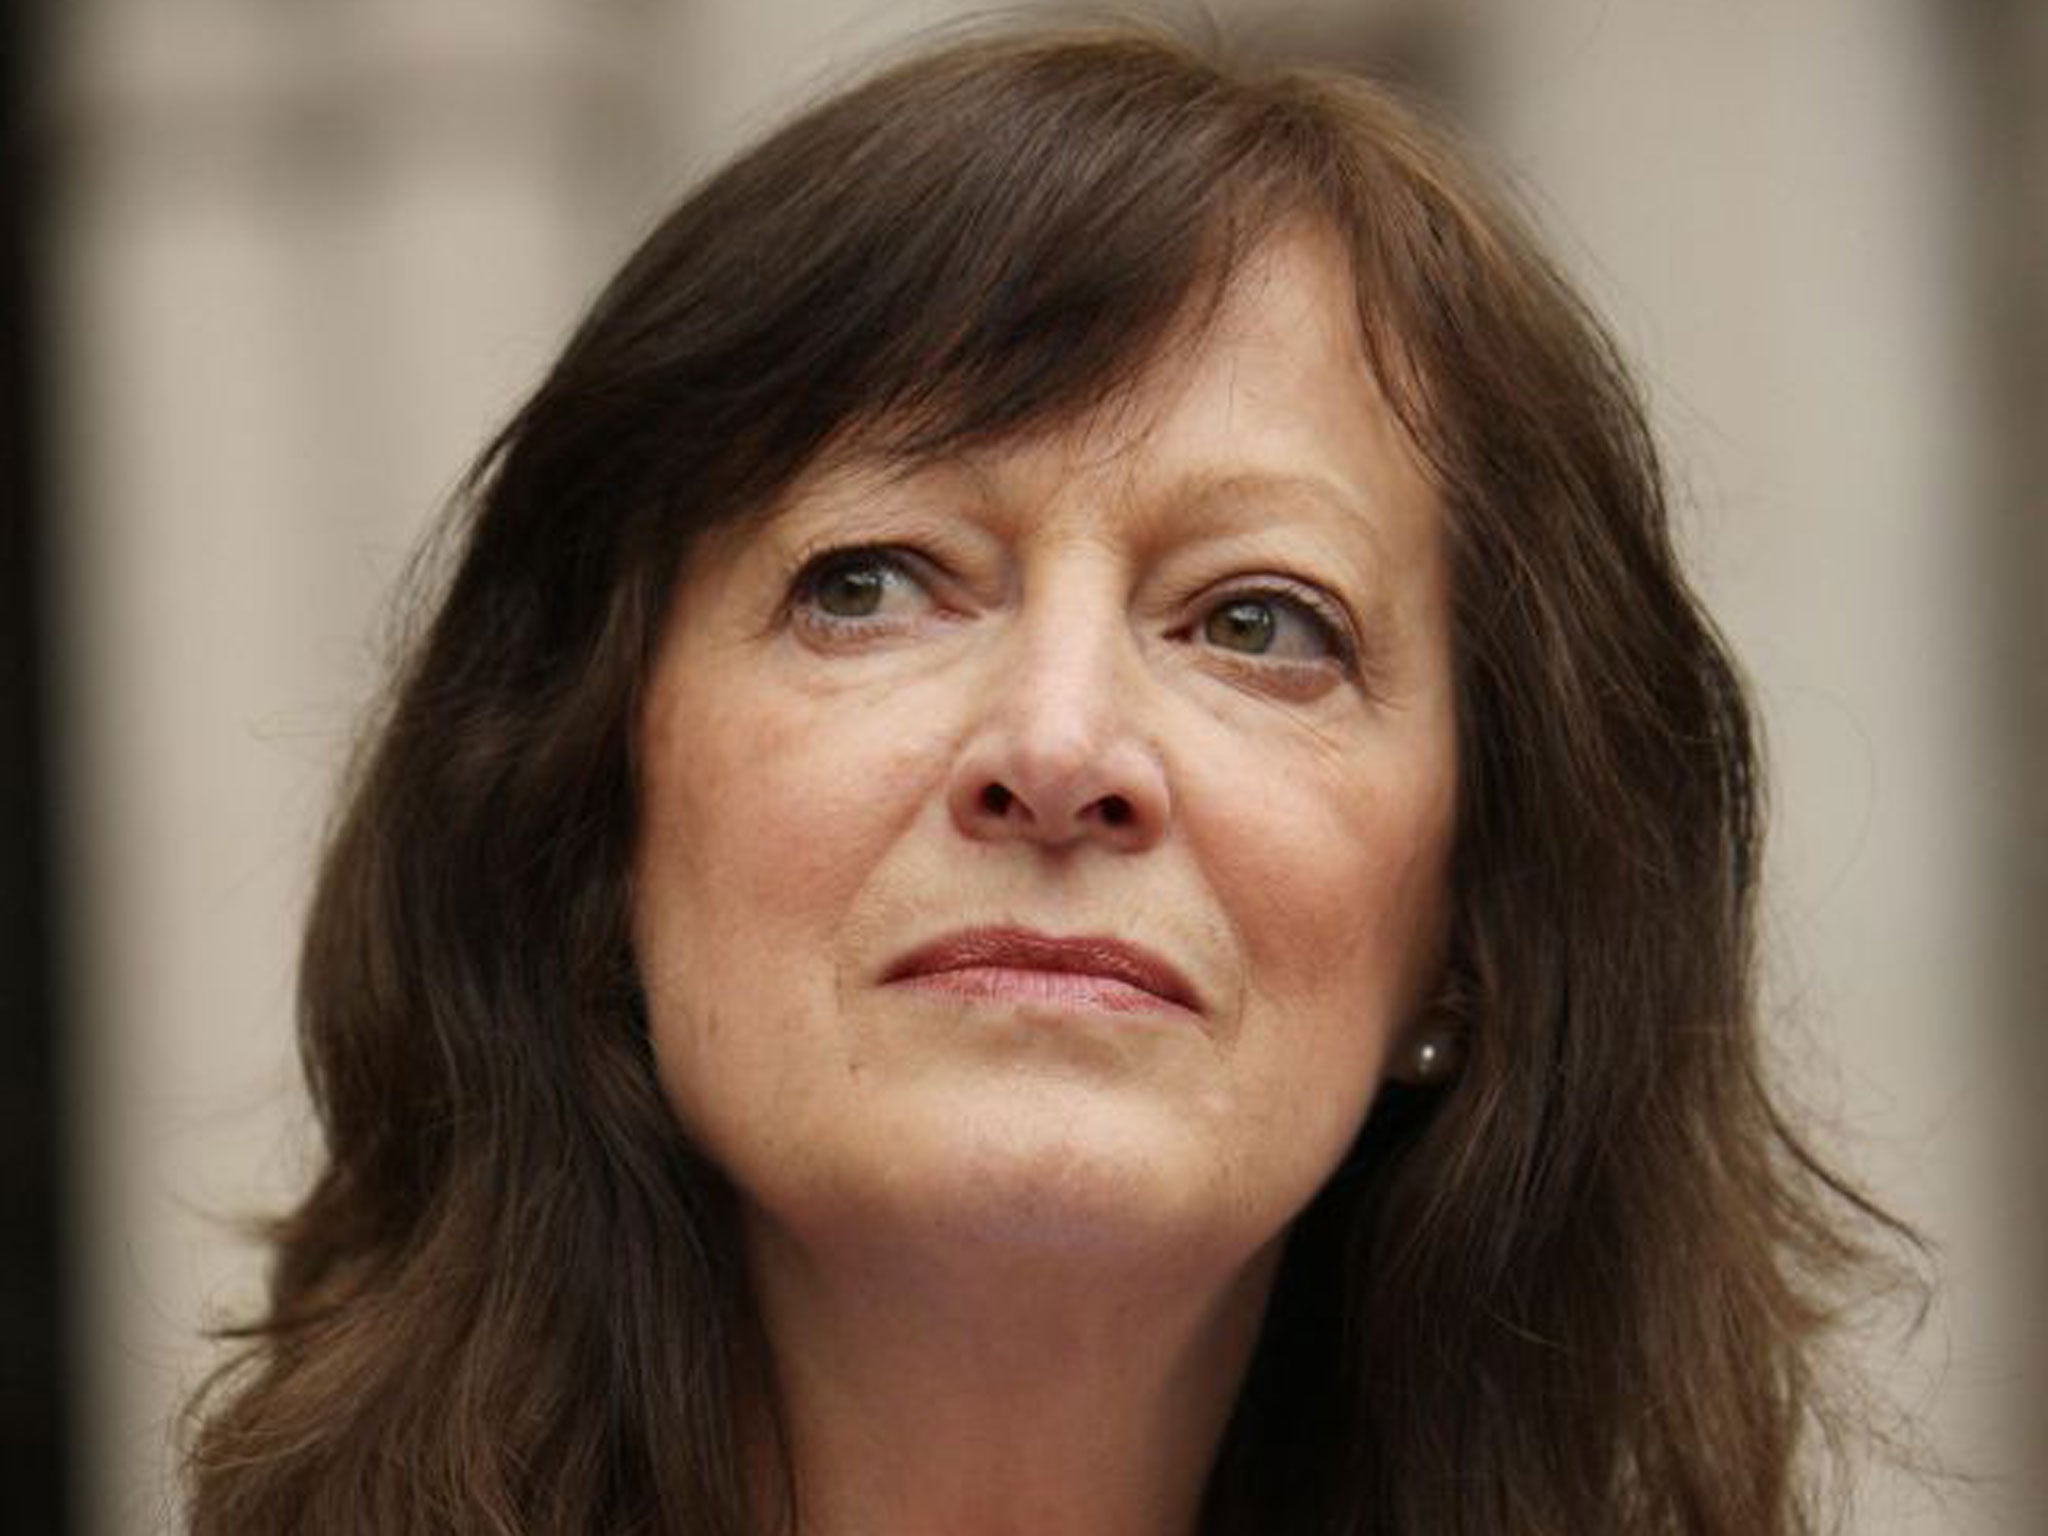 Sharon Shoesmith, former head of children’s services in Haringey